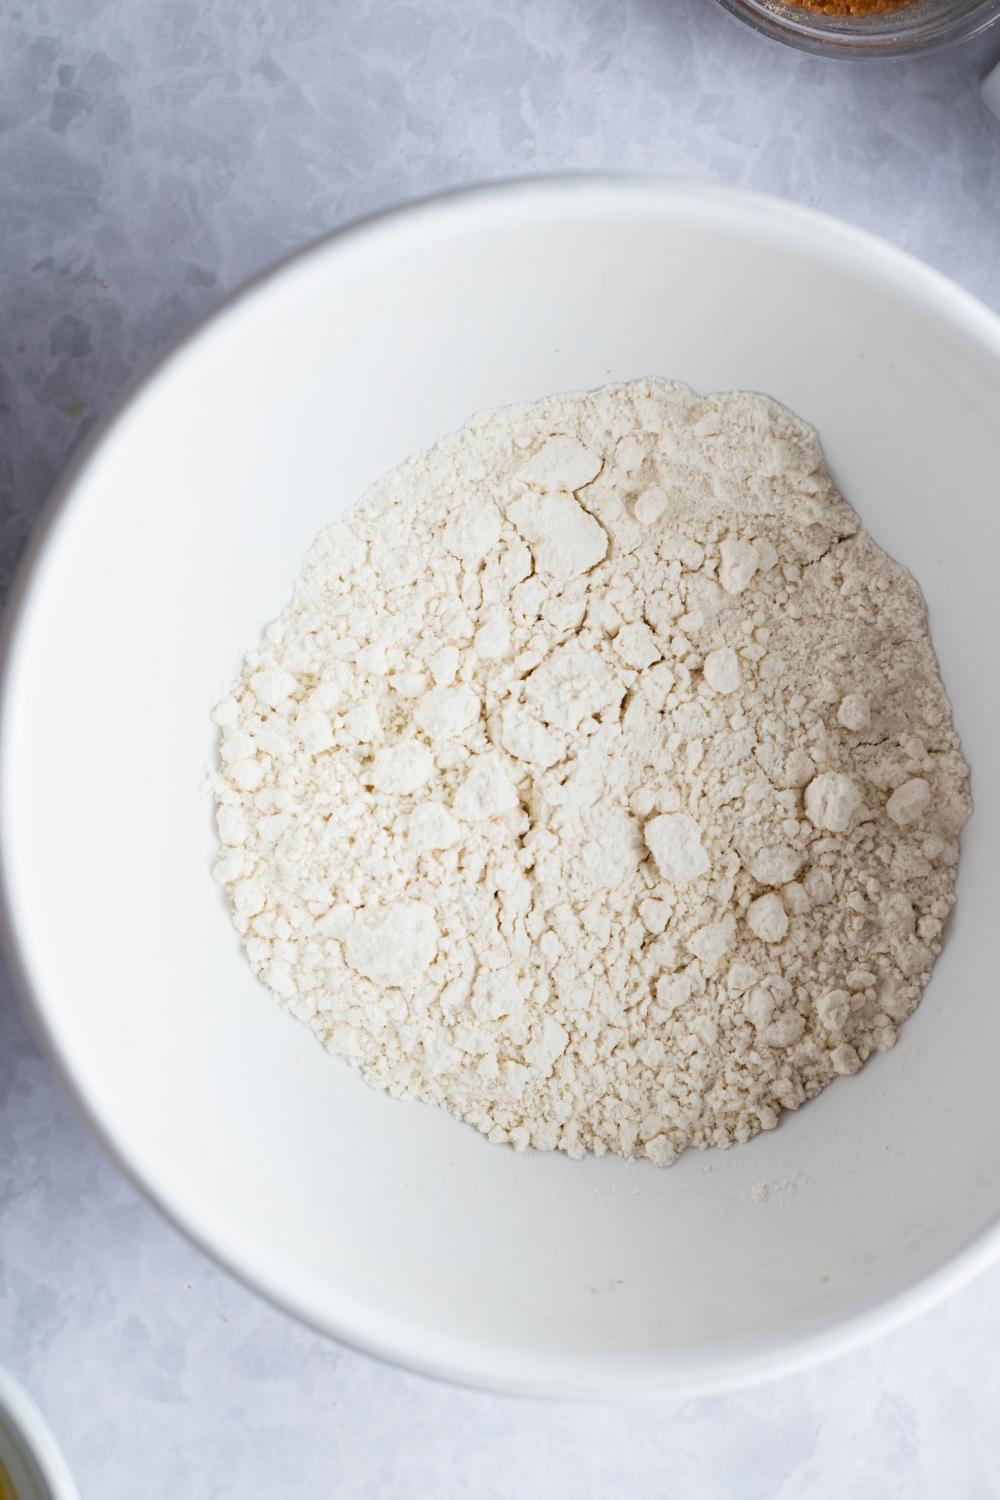 An overhead view of a mixing bowl with heat treated flour.